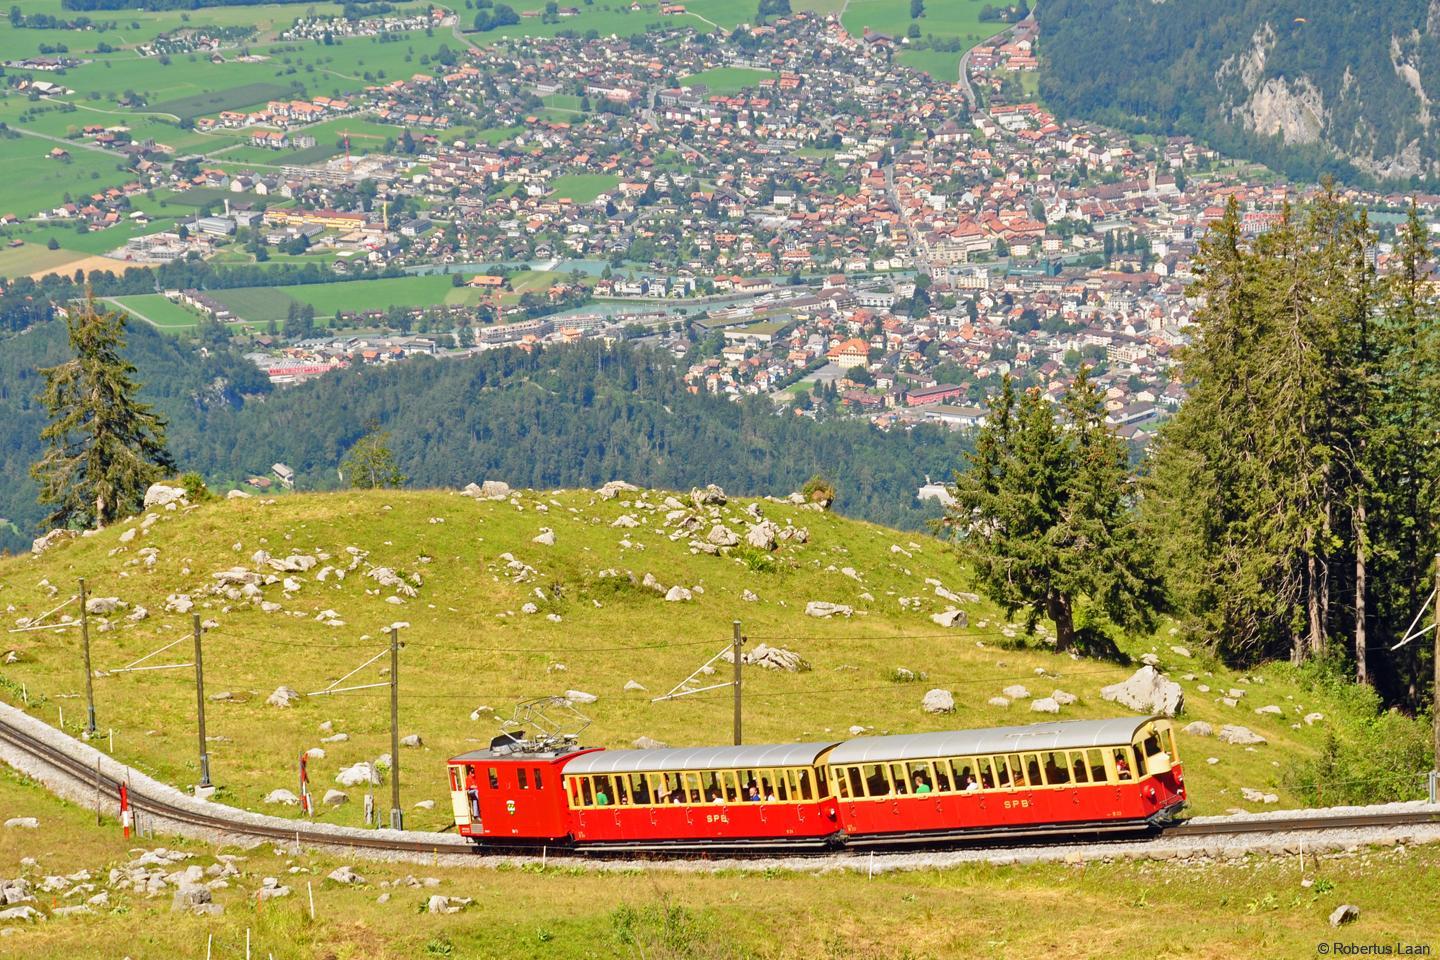 Looking down at Interlaken and the Schynige Platte train